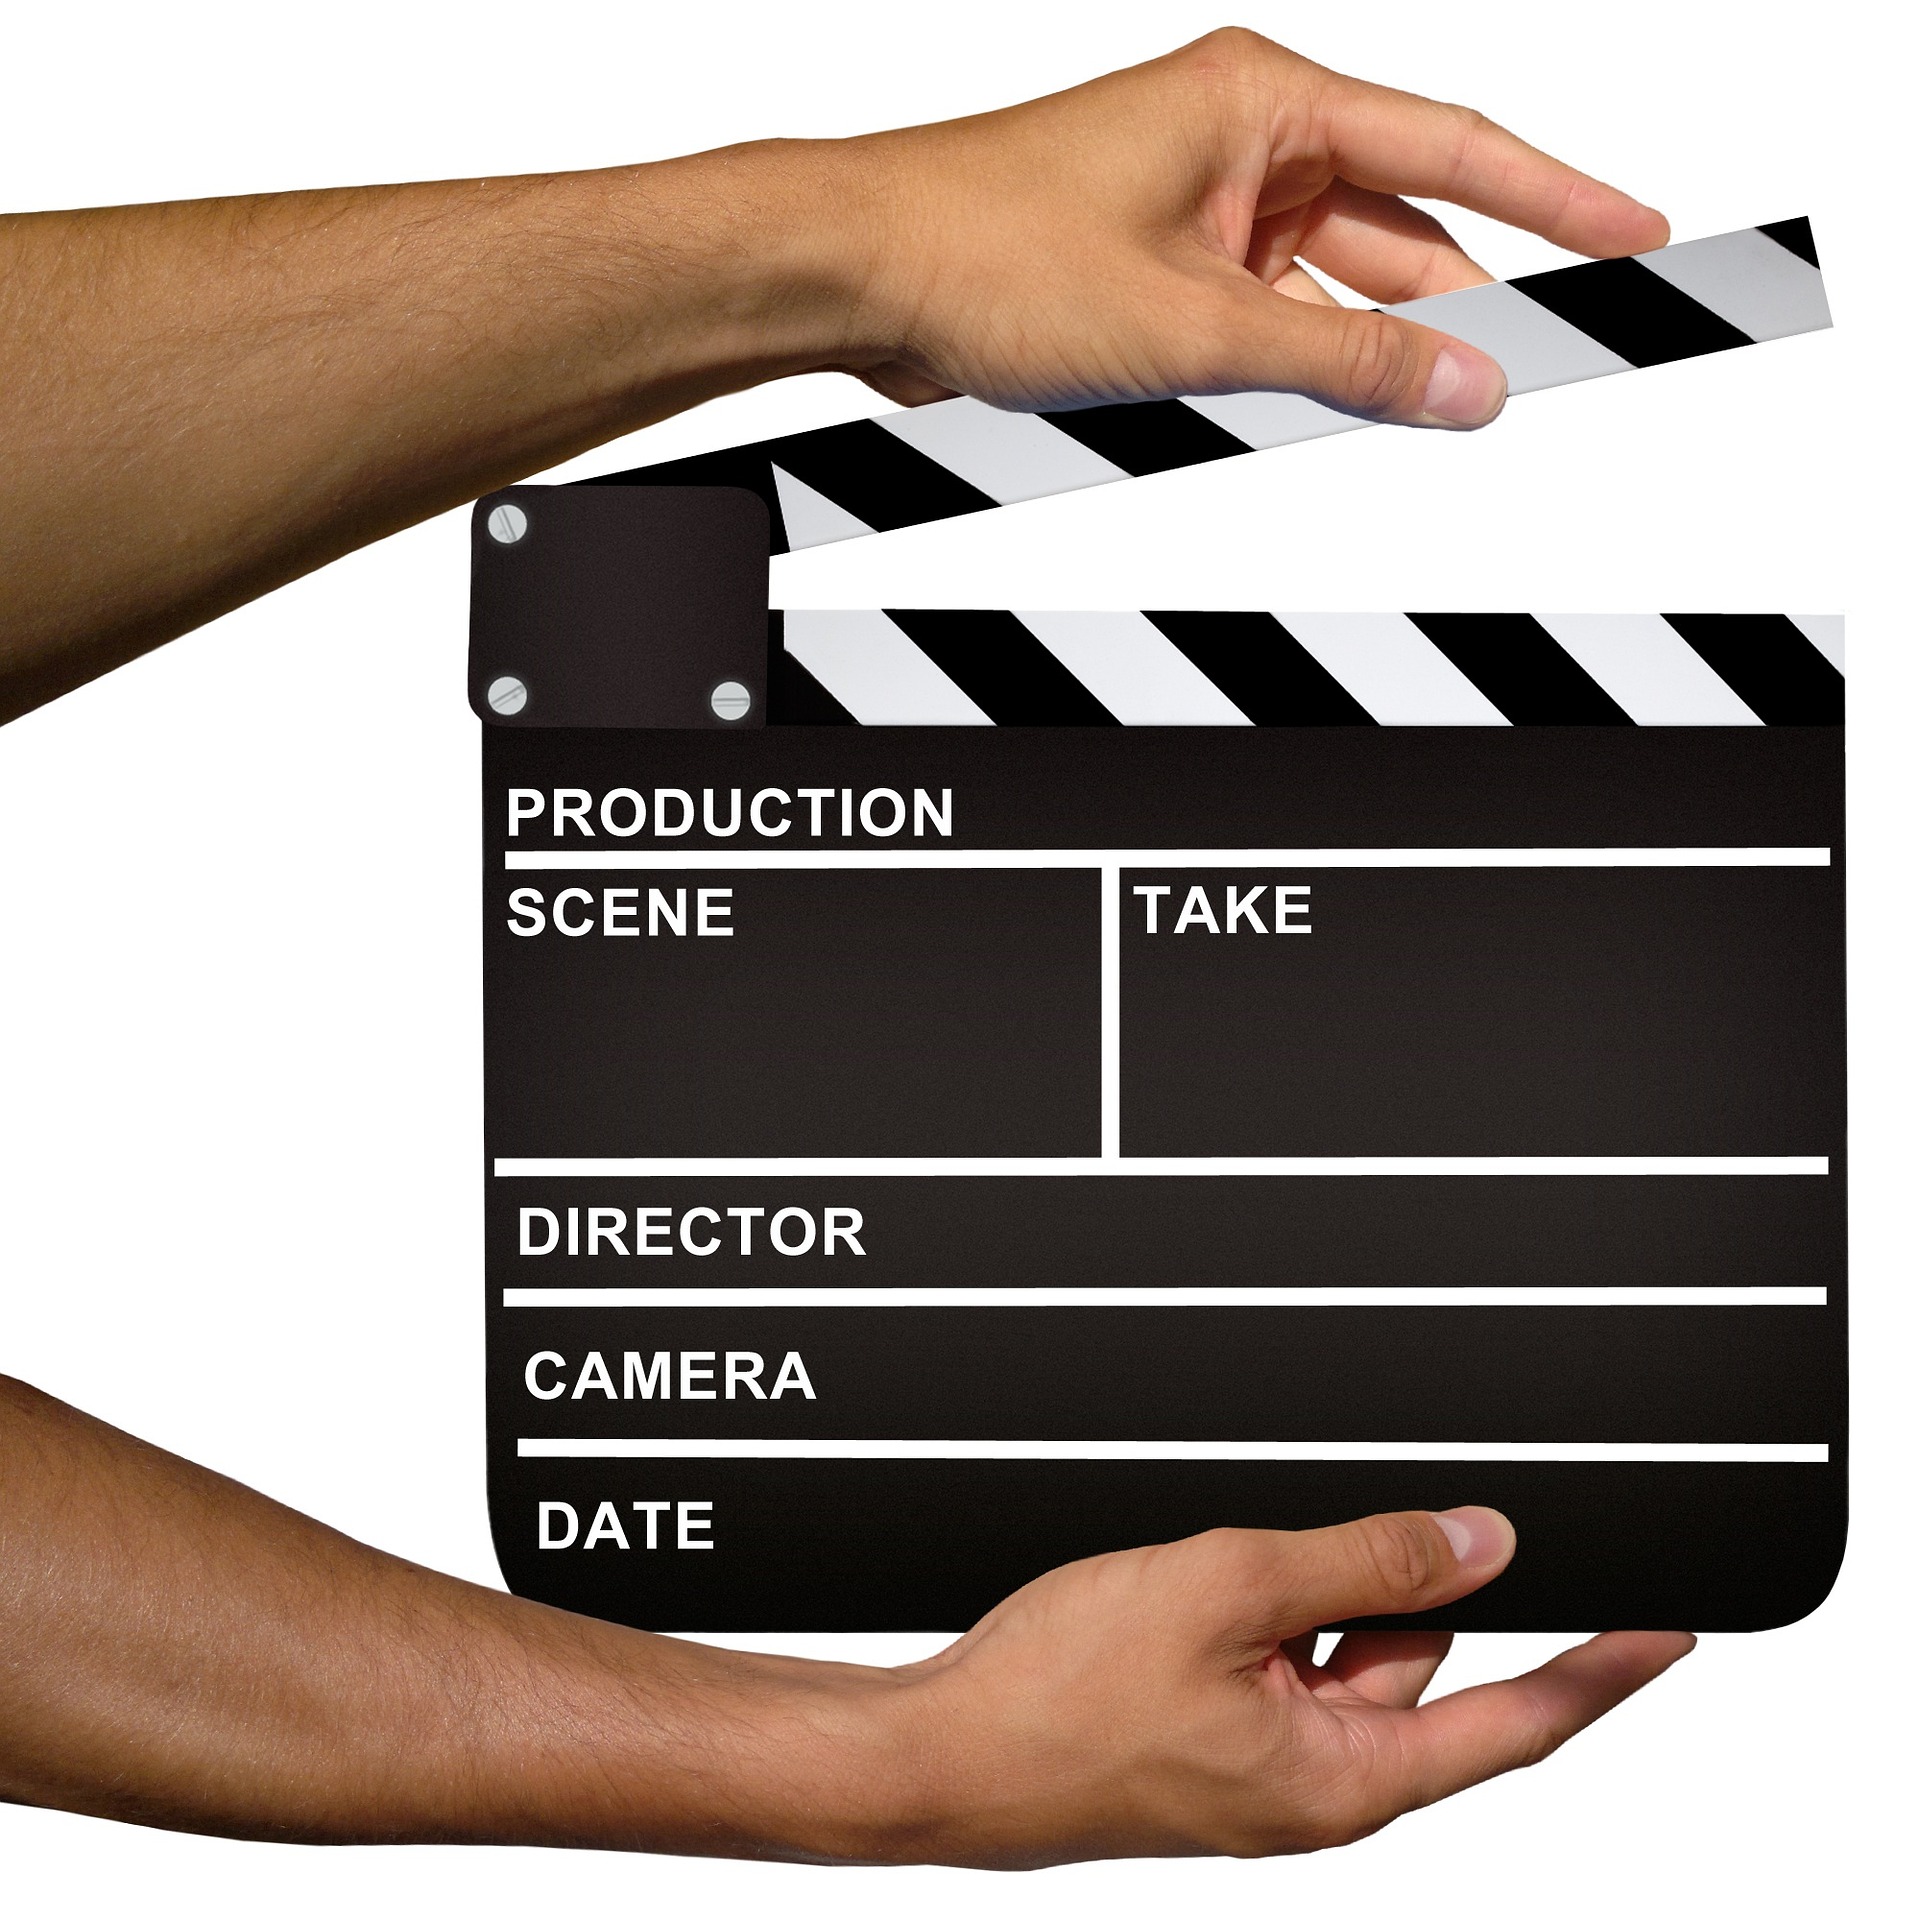 10 Questions for Screenwriters and Film Directors